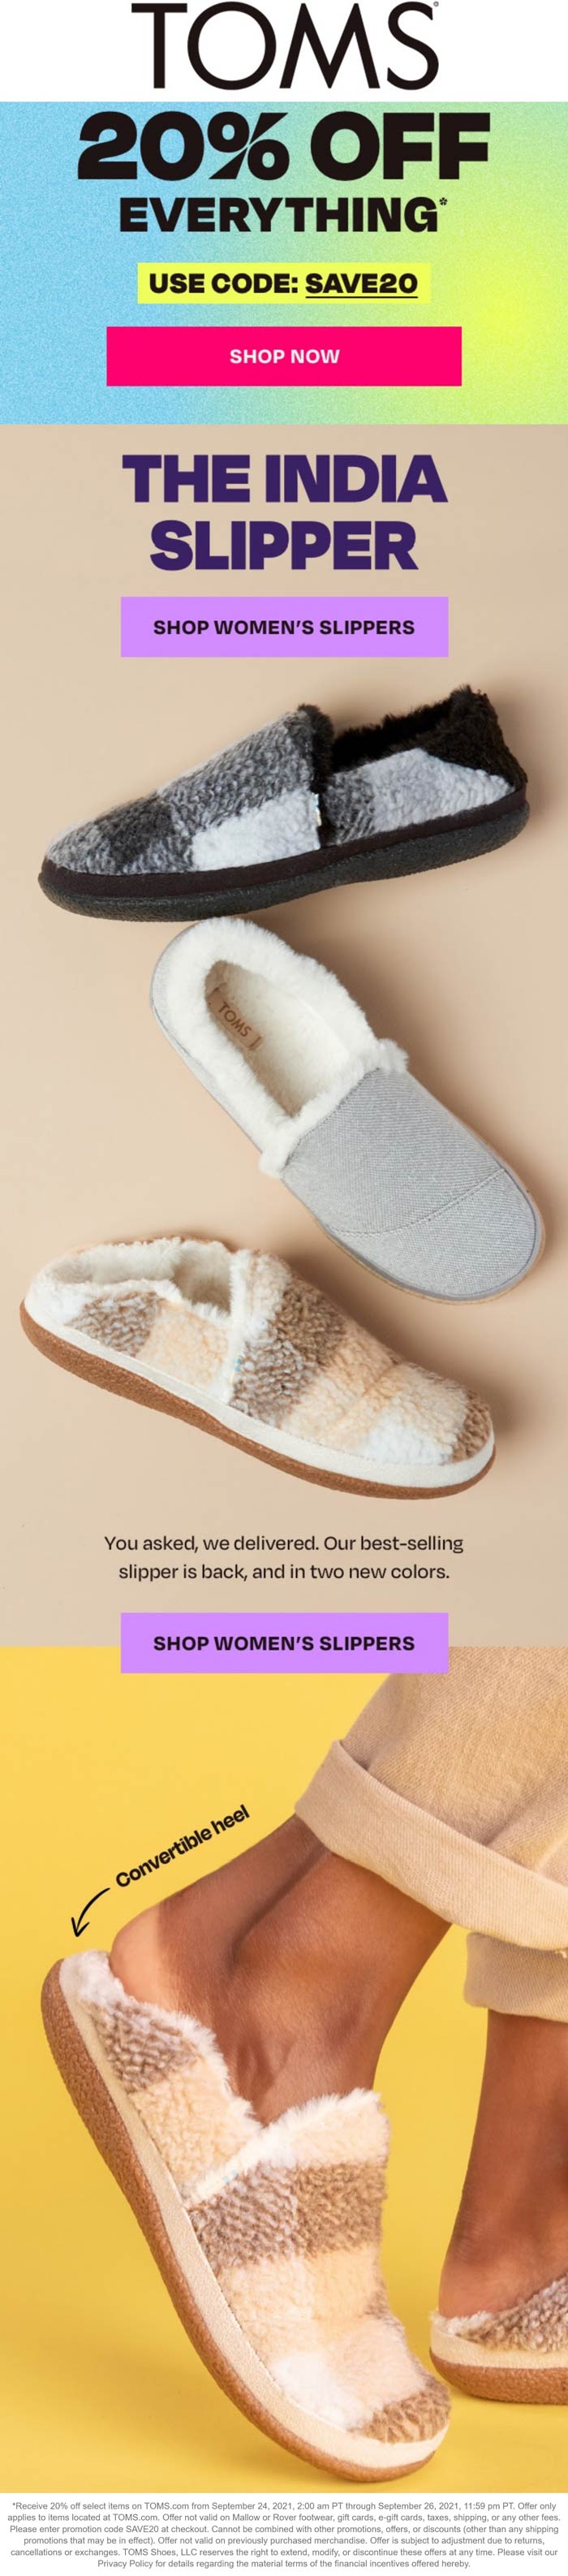 TOMS stores Coupon  20% off everything at TOMS shoes via promo code SAVE20 #toms 